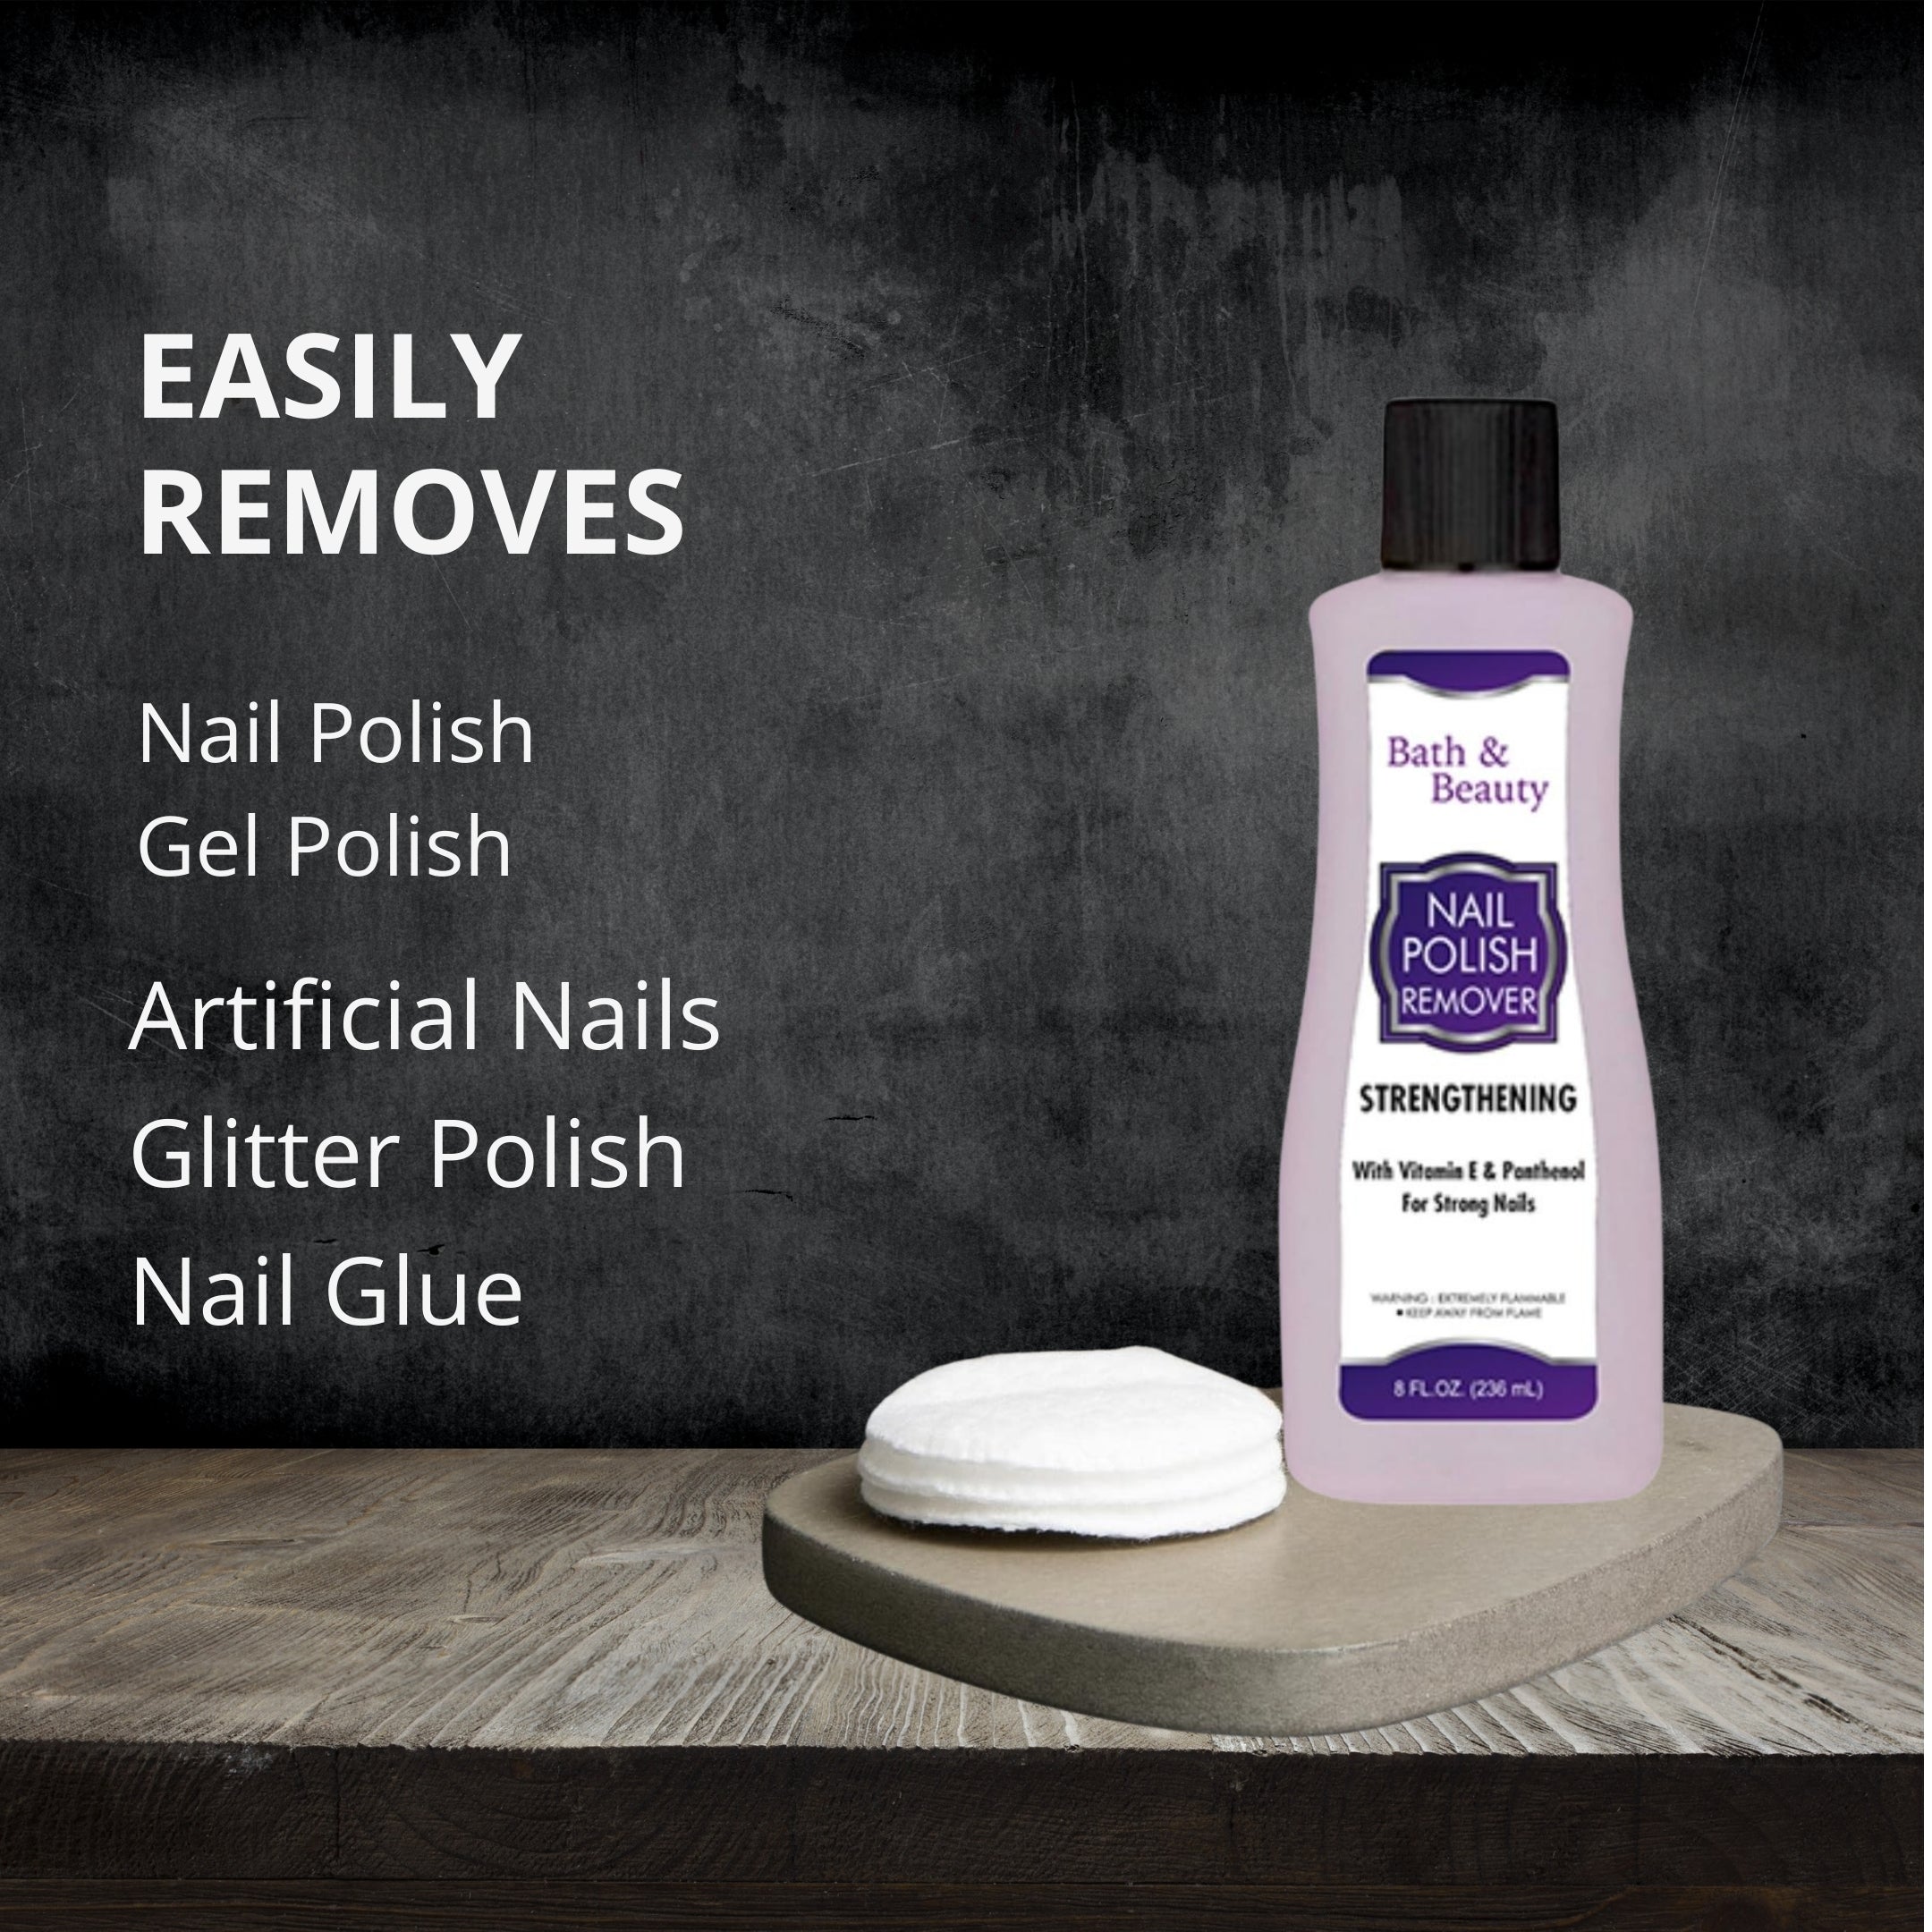 Enliven Nail Polish Remover Strengthening Pro Vitamin B5 - Price in India,  Buy Enliven Nail Polish Remover Strengthening Pro Vitamin B5 Online In  India, Reviews, Ratings & Features | Flipkart.com